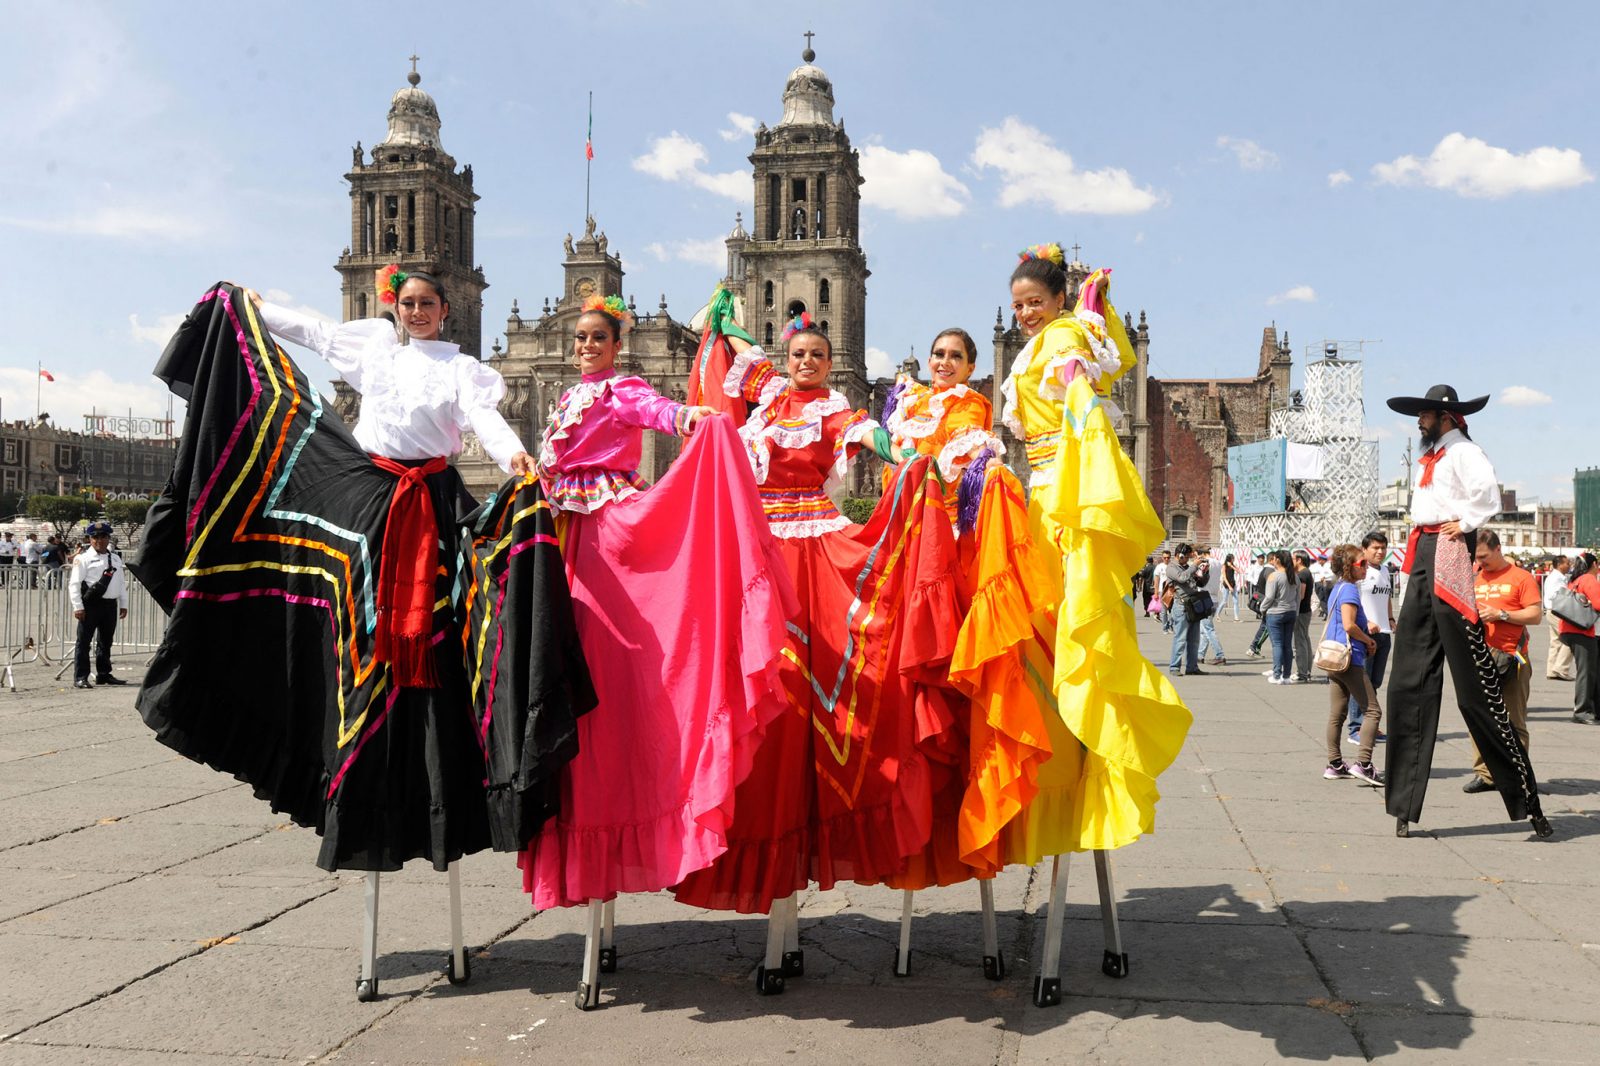 Can You Pass This Increasingly Difficult General Knowledge Quiz? Mexican Indenpendence Day Stilts